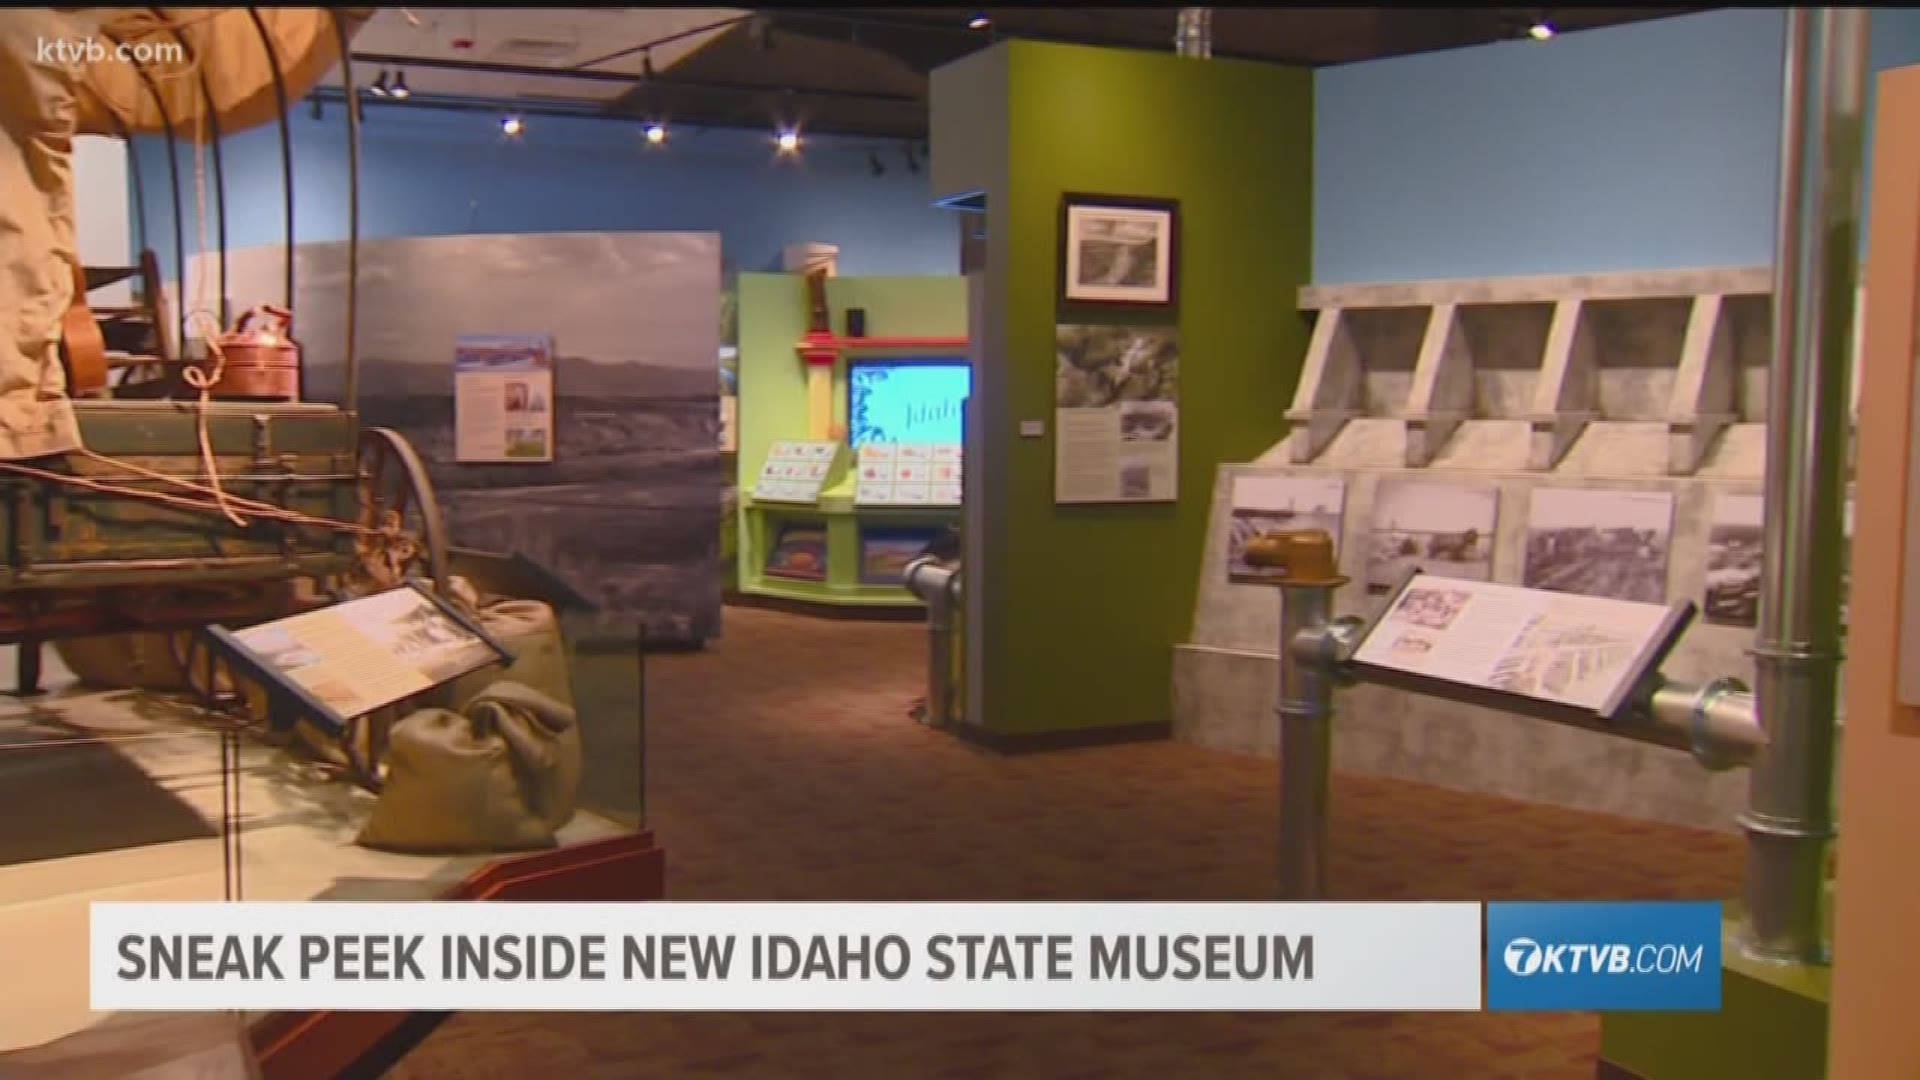 The long wait is almost over. The renovated and reimagined museum will open to the public soon.